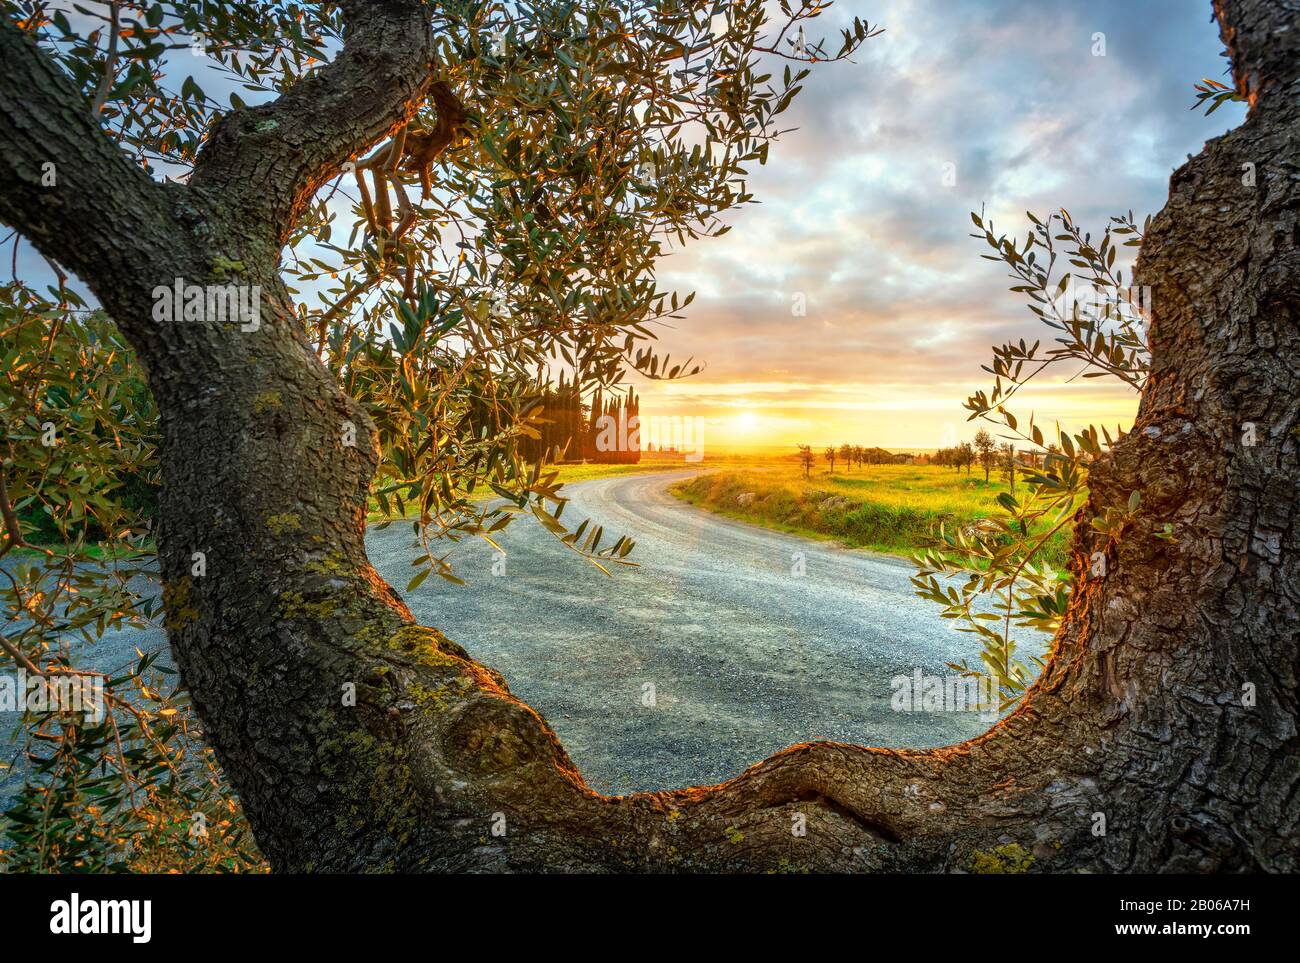 Olive Tree branches and bark, cypresses and country road on background at sunset. Casale Marittimo. Pisa, Tuscany, Italy. Stock Photo